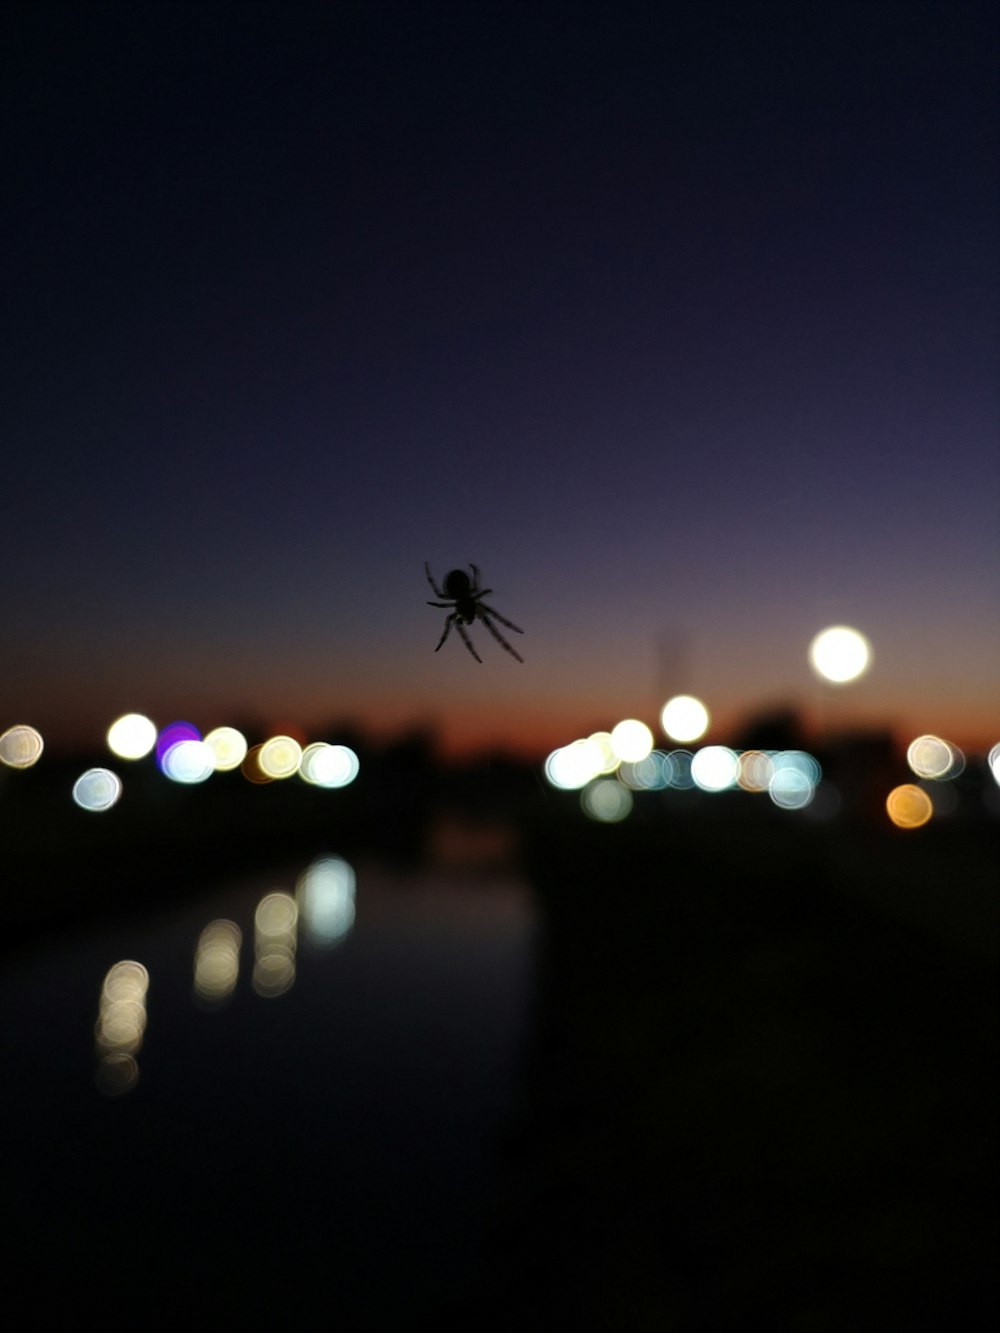 a spider hanging from the side of a building at night